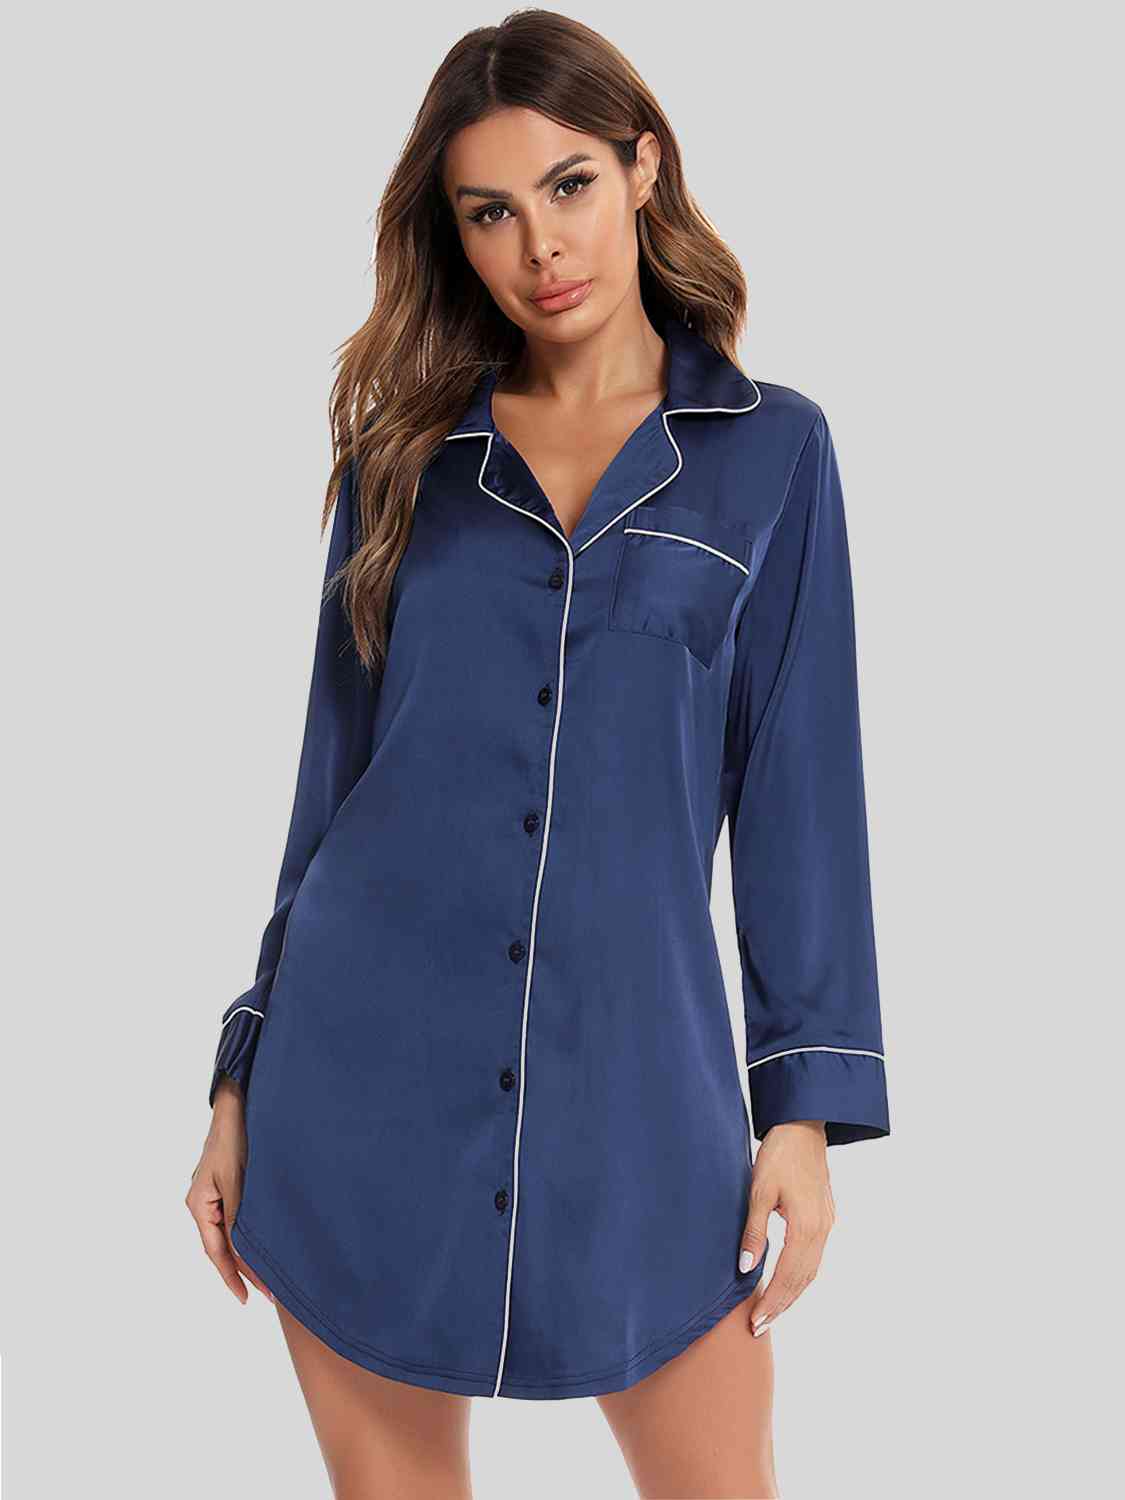 Button Up Lapel Collar Night Dress with Pocket Peacock Blue